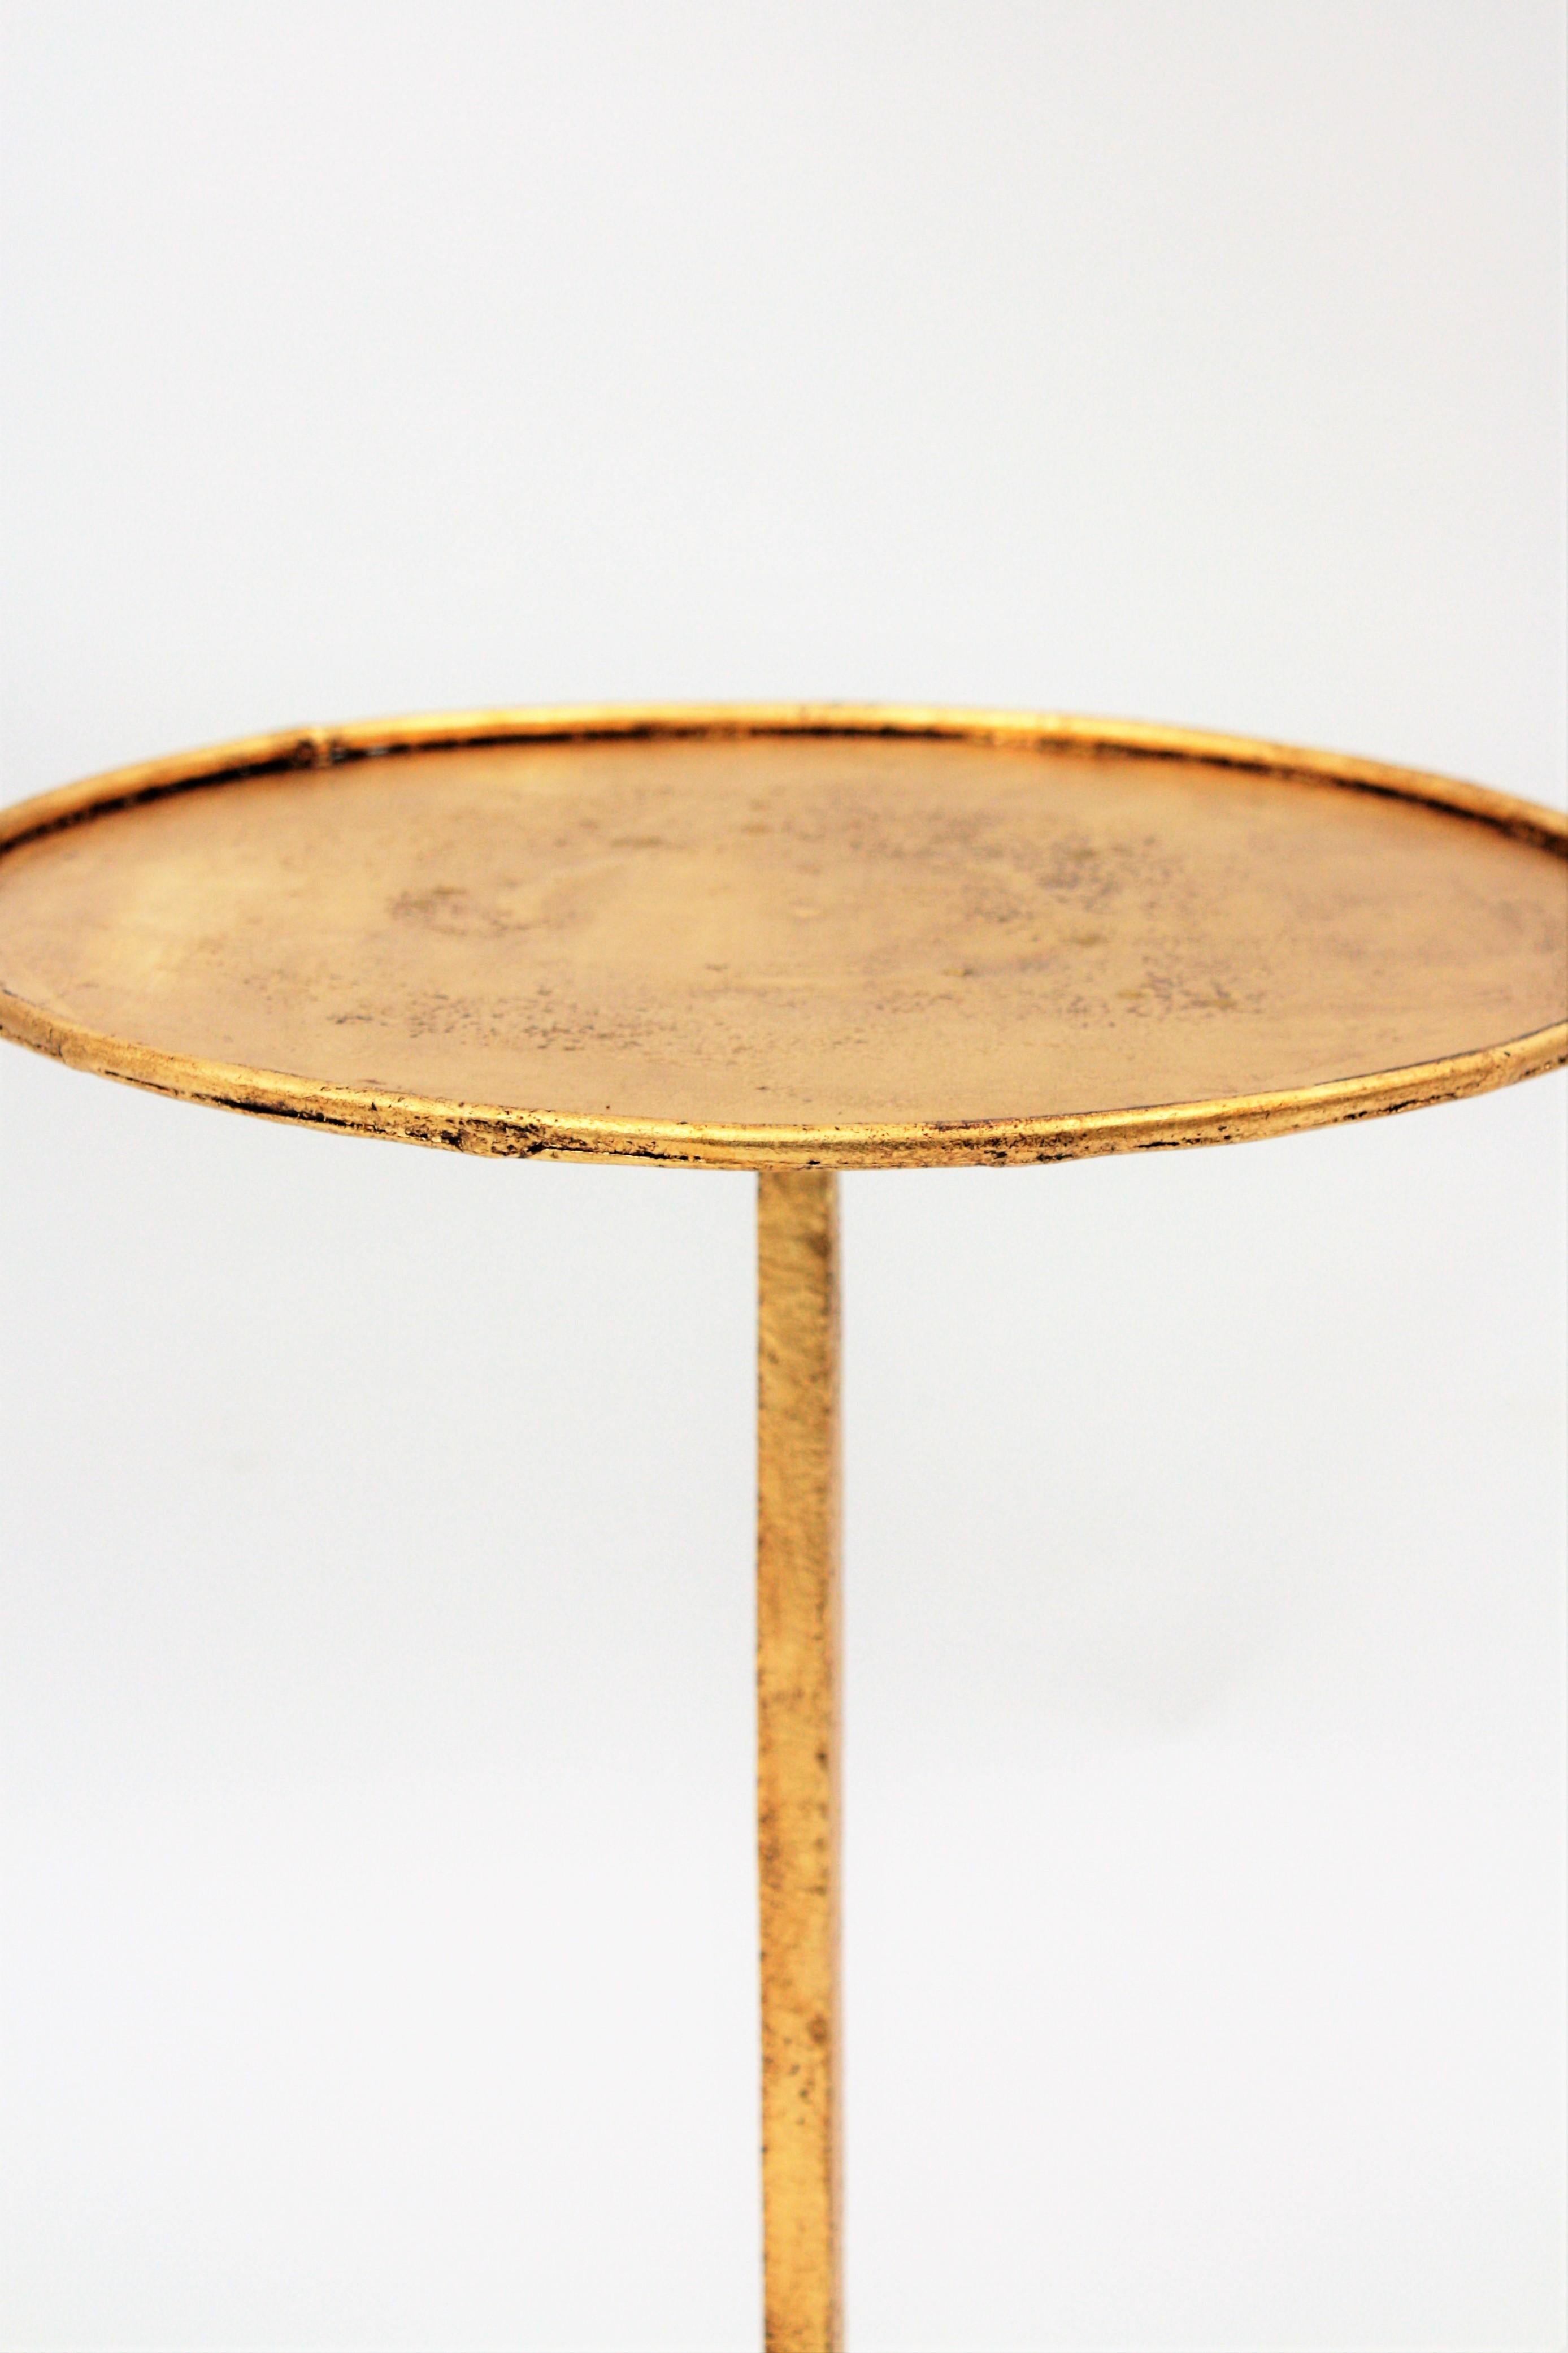 Gold Leaf Spanish Mid-20th Century Hand-Hammered Gilt Iron Drinks Table